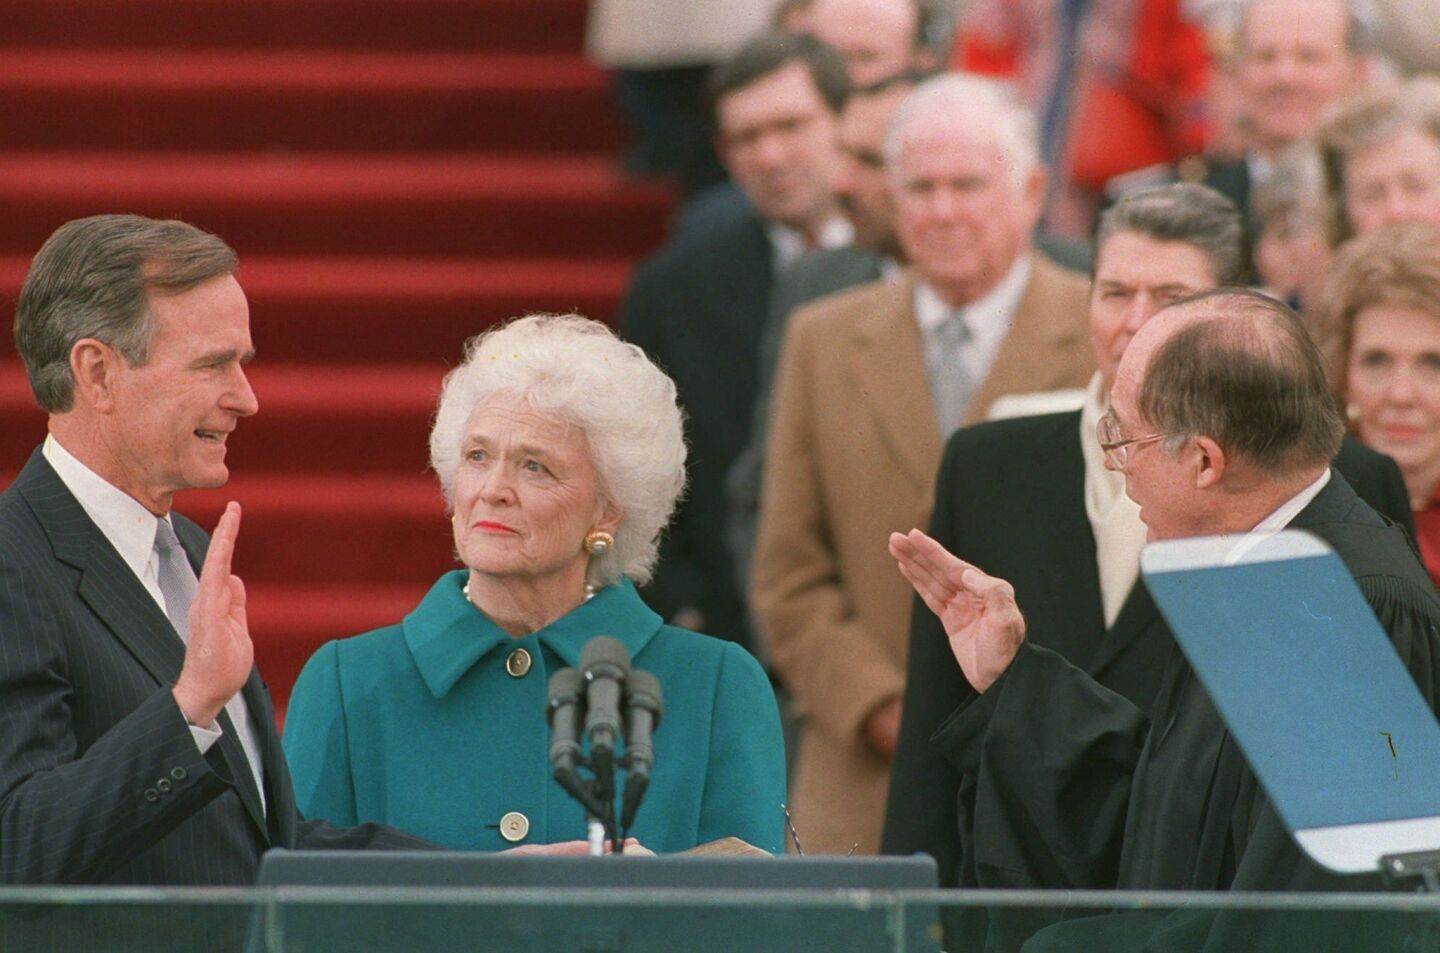 George H.W. Bush is sworn into office as the 41st president of the United States on Jan. 20, 1989.